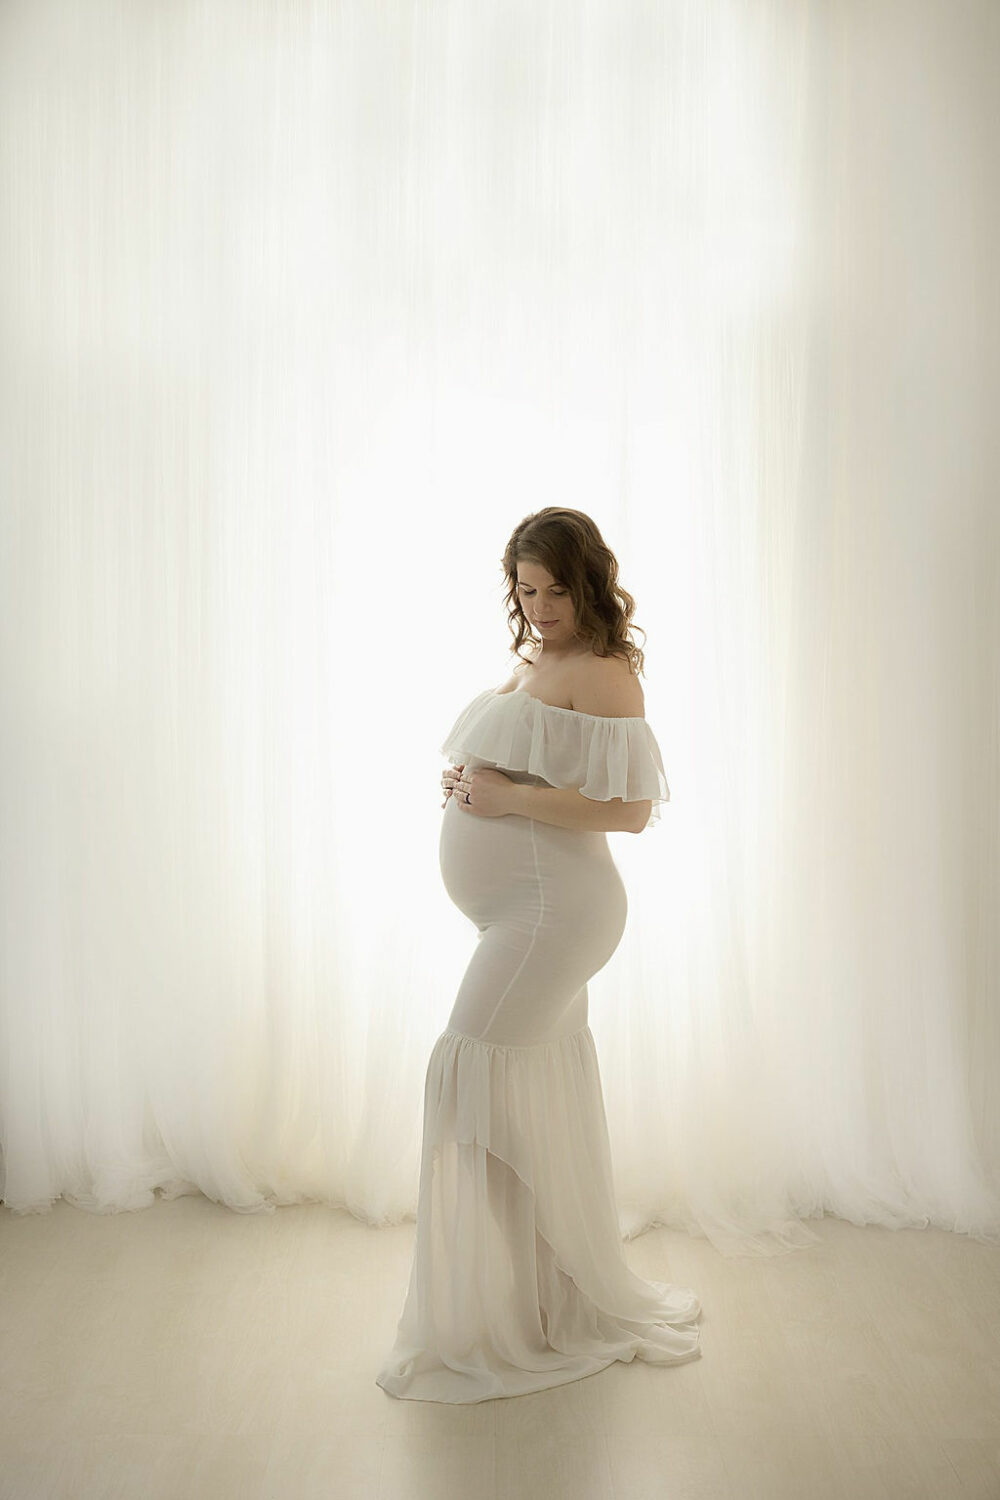 Woman wearing dress standing in front of light in bright background posing for her and Maternity Photoshoot, taken in Southampton, New Jersey.